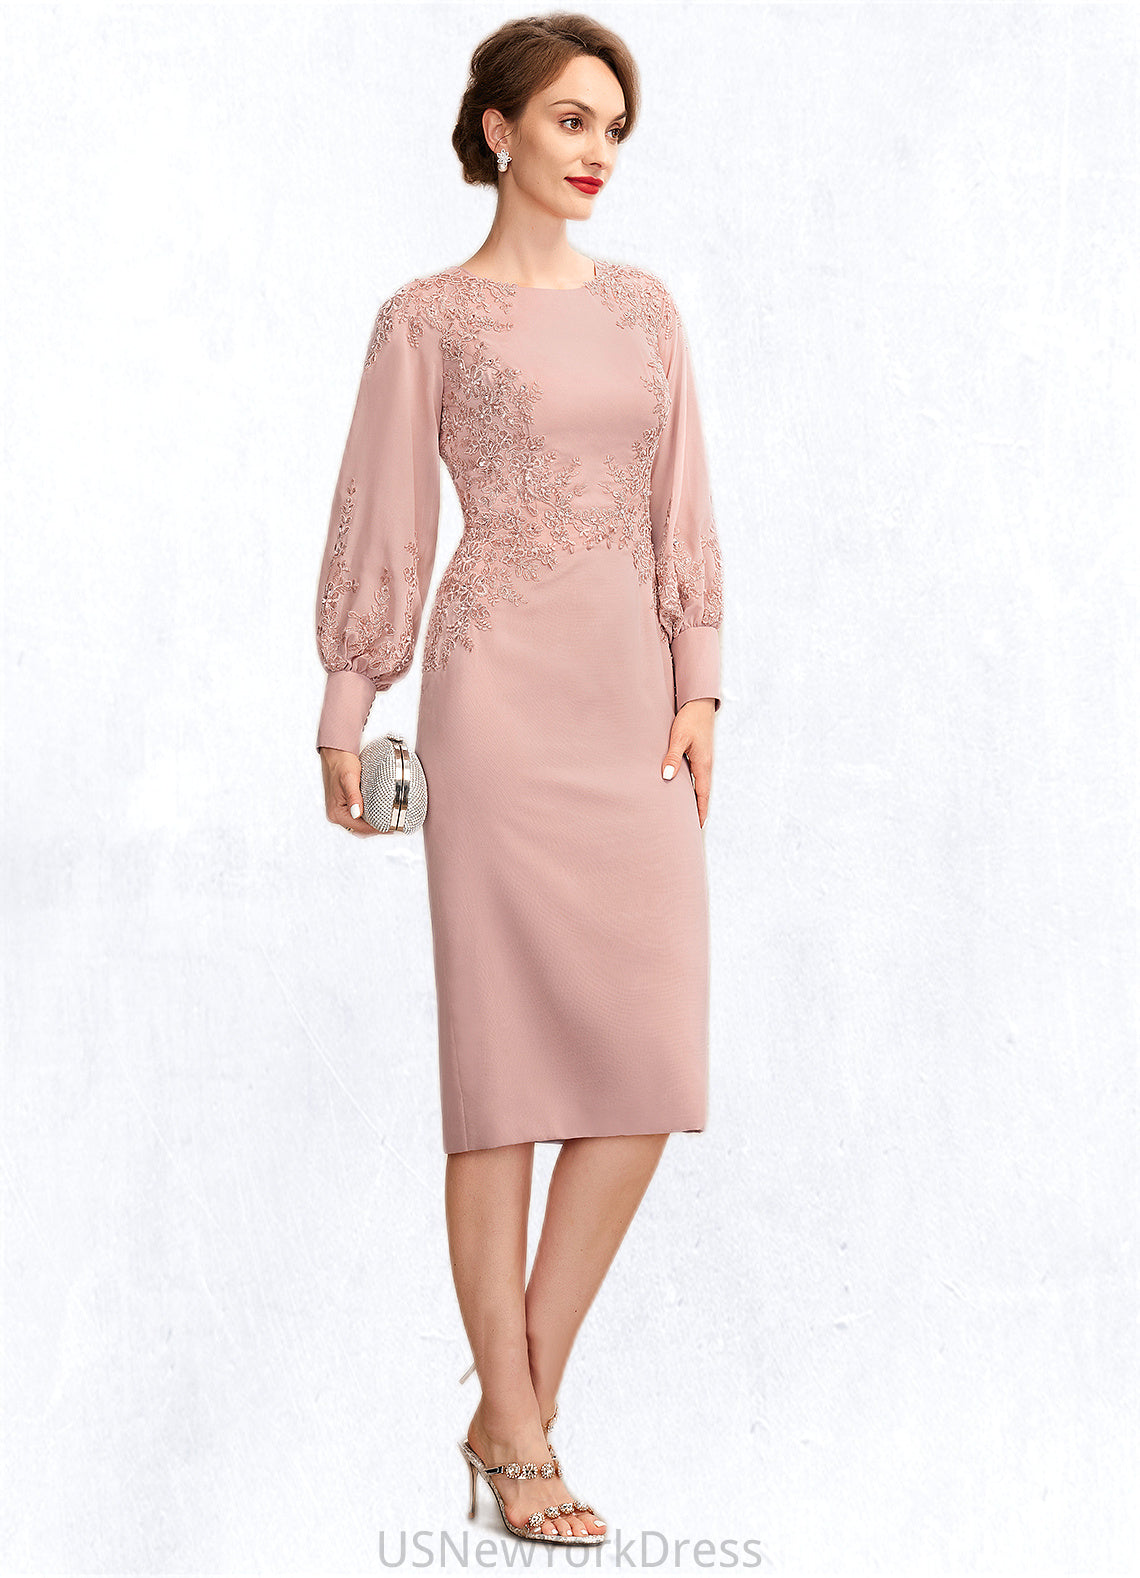 Kiara Sheath/Column Scoop Neck Knee-Length Chiffon Lace Mother of the Bride Dress With Beading Sequins DJ126P0015020